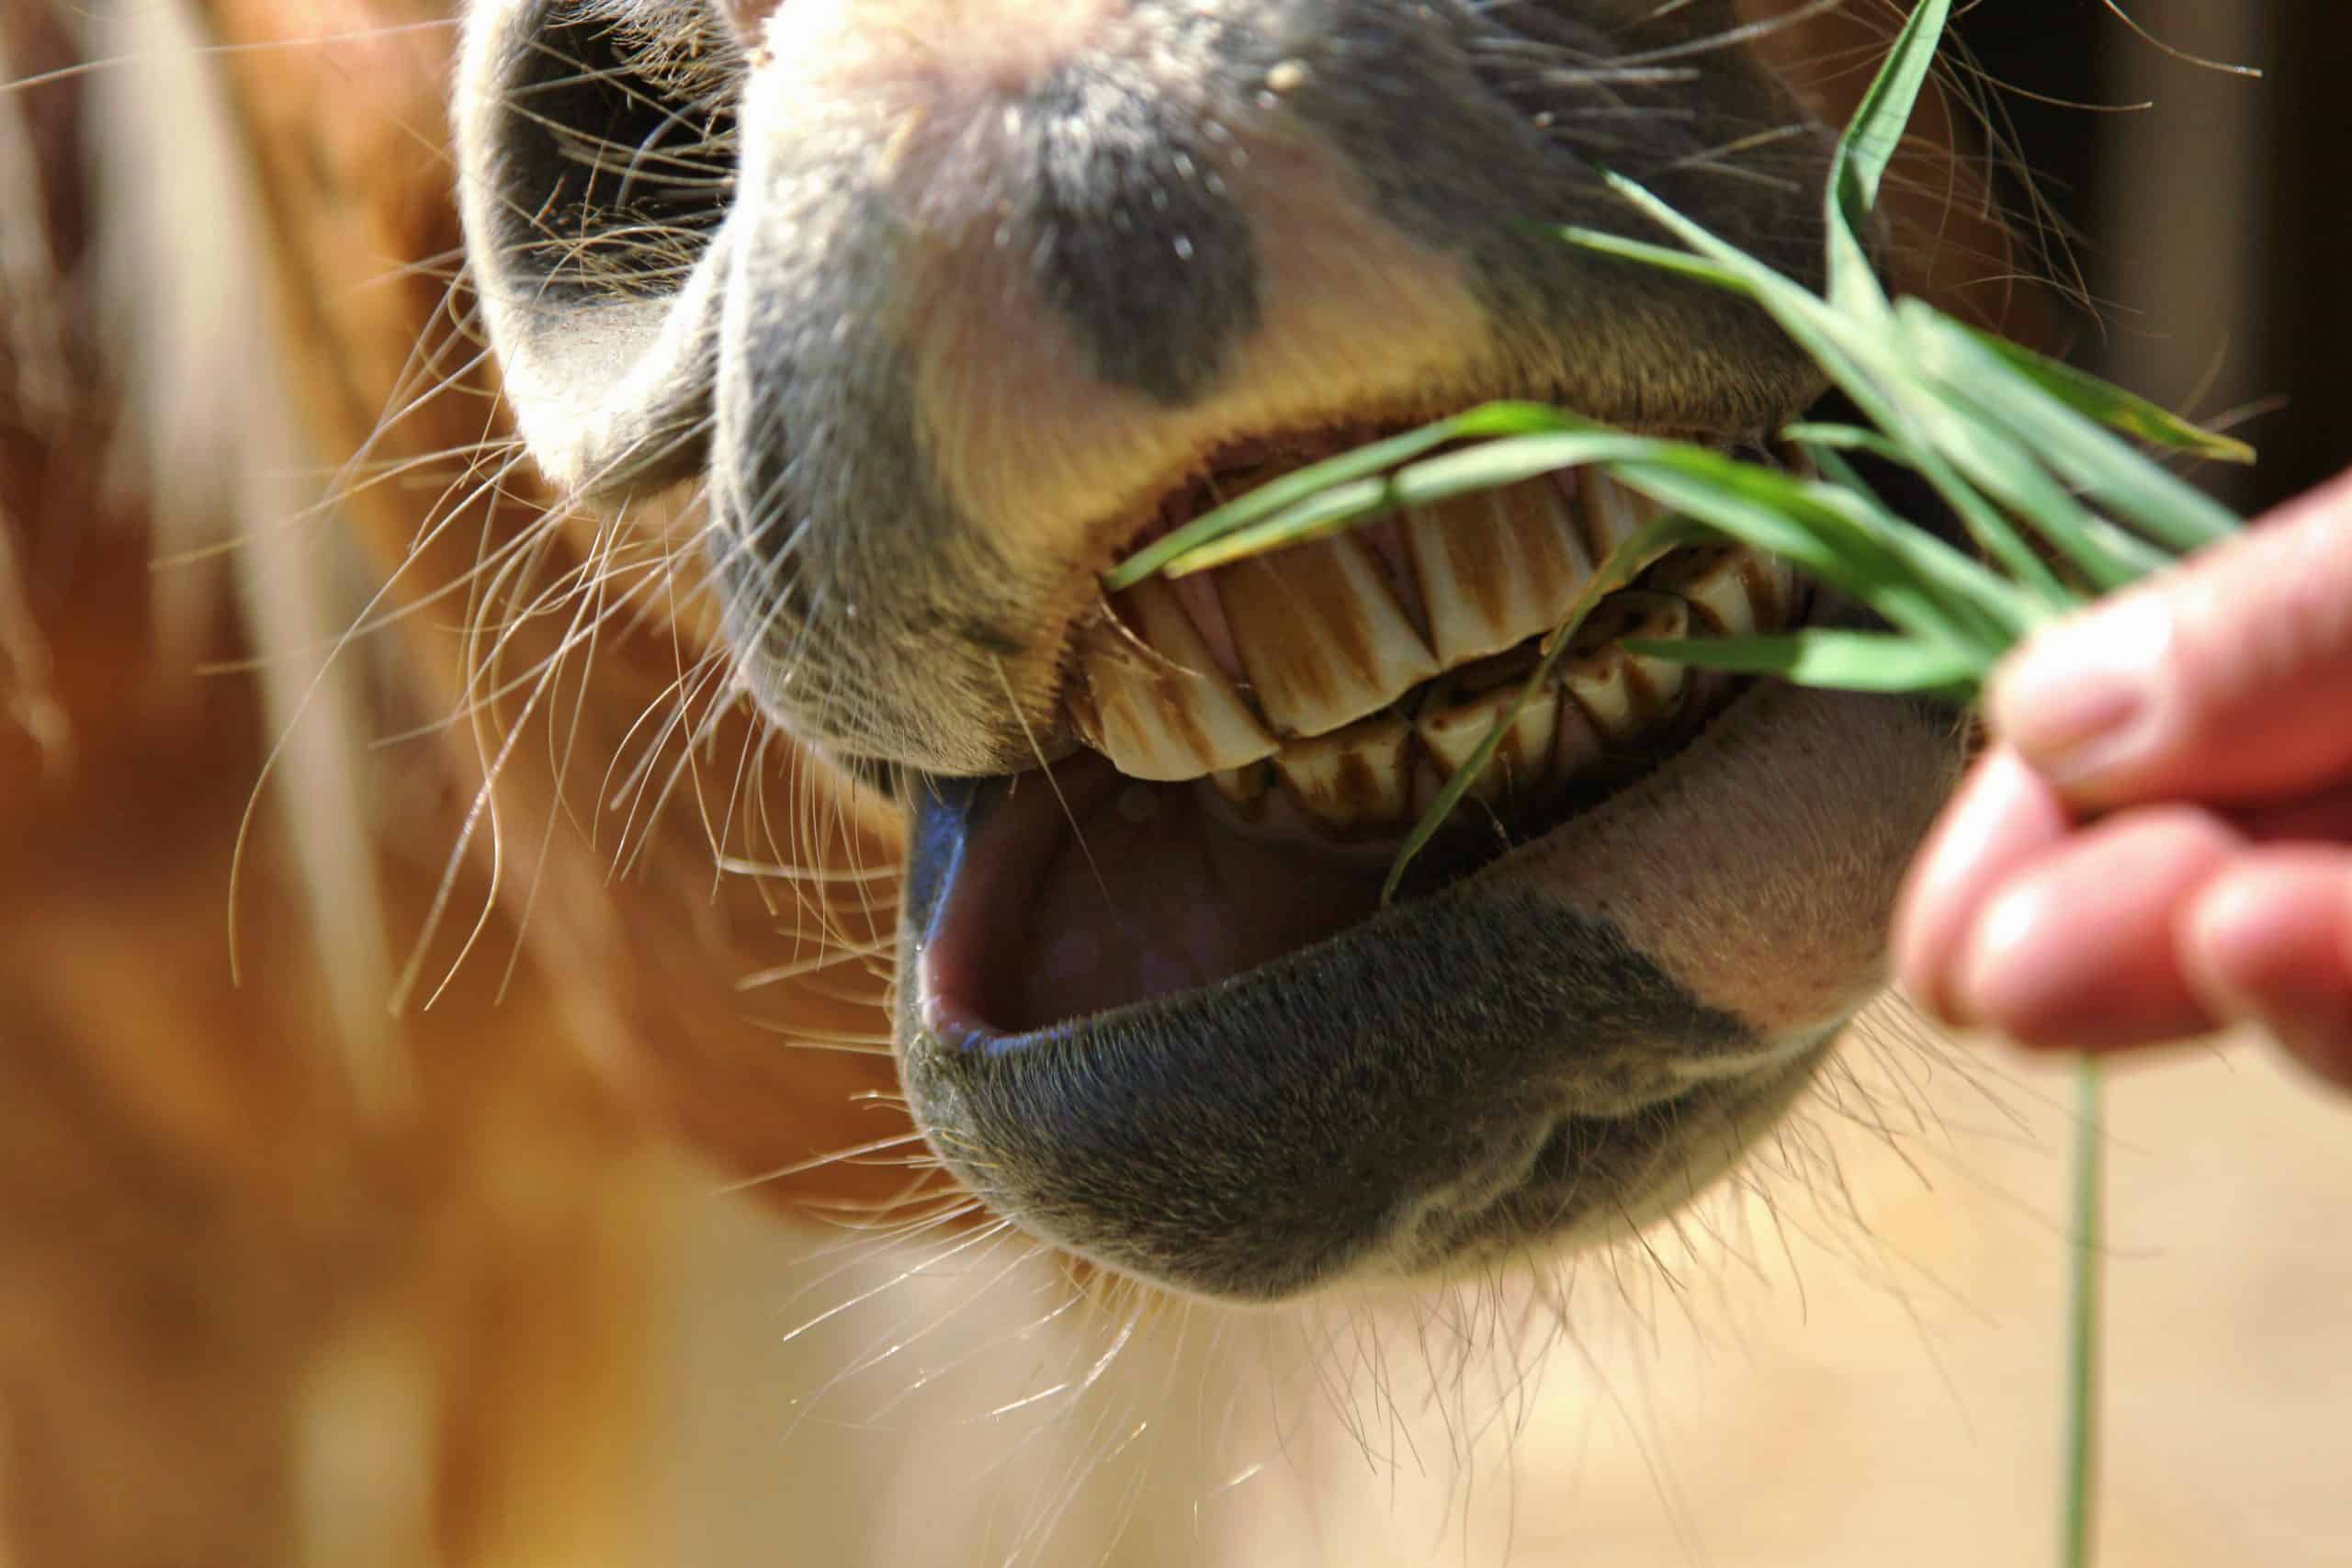 horse mouth and teeth reaching for food.